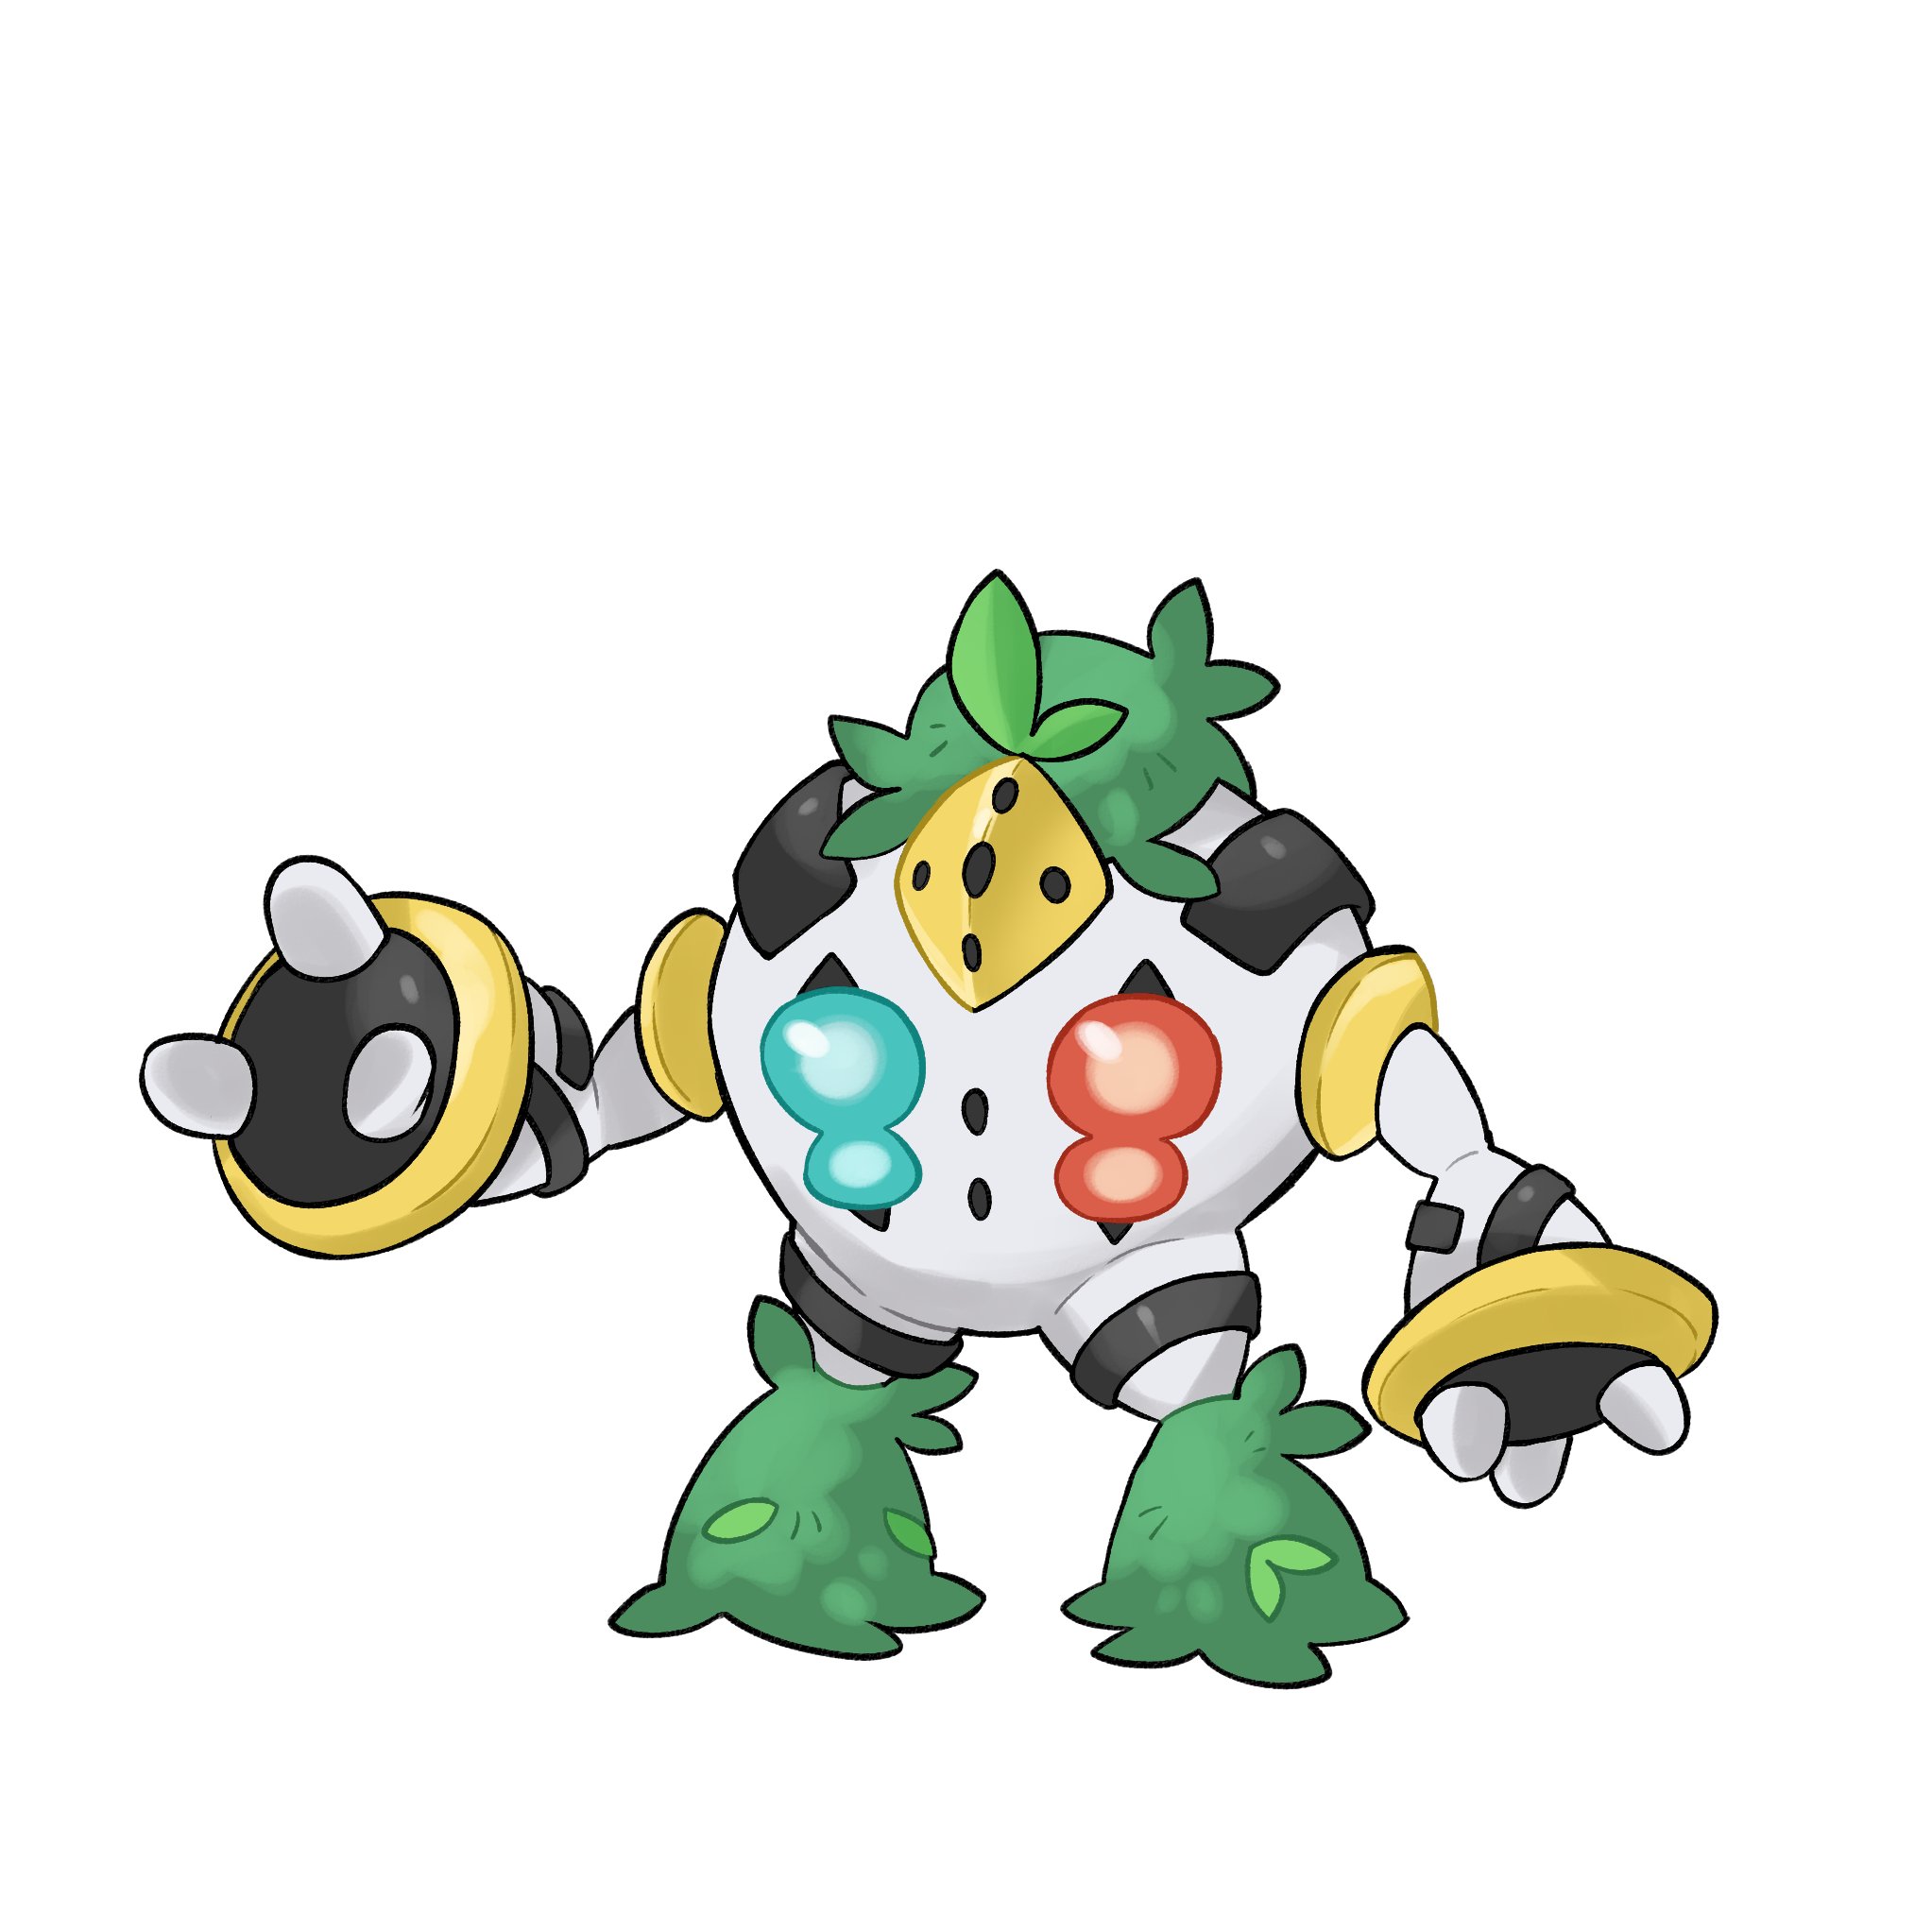 Bulbagarden - The original Pokémon community on X: 'According to legend,  Regigigas pulled landmasses together and bound them with rope to create the  continent of Hisui. Though I have my doubts, the